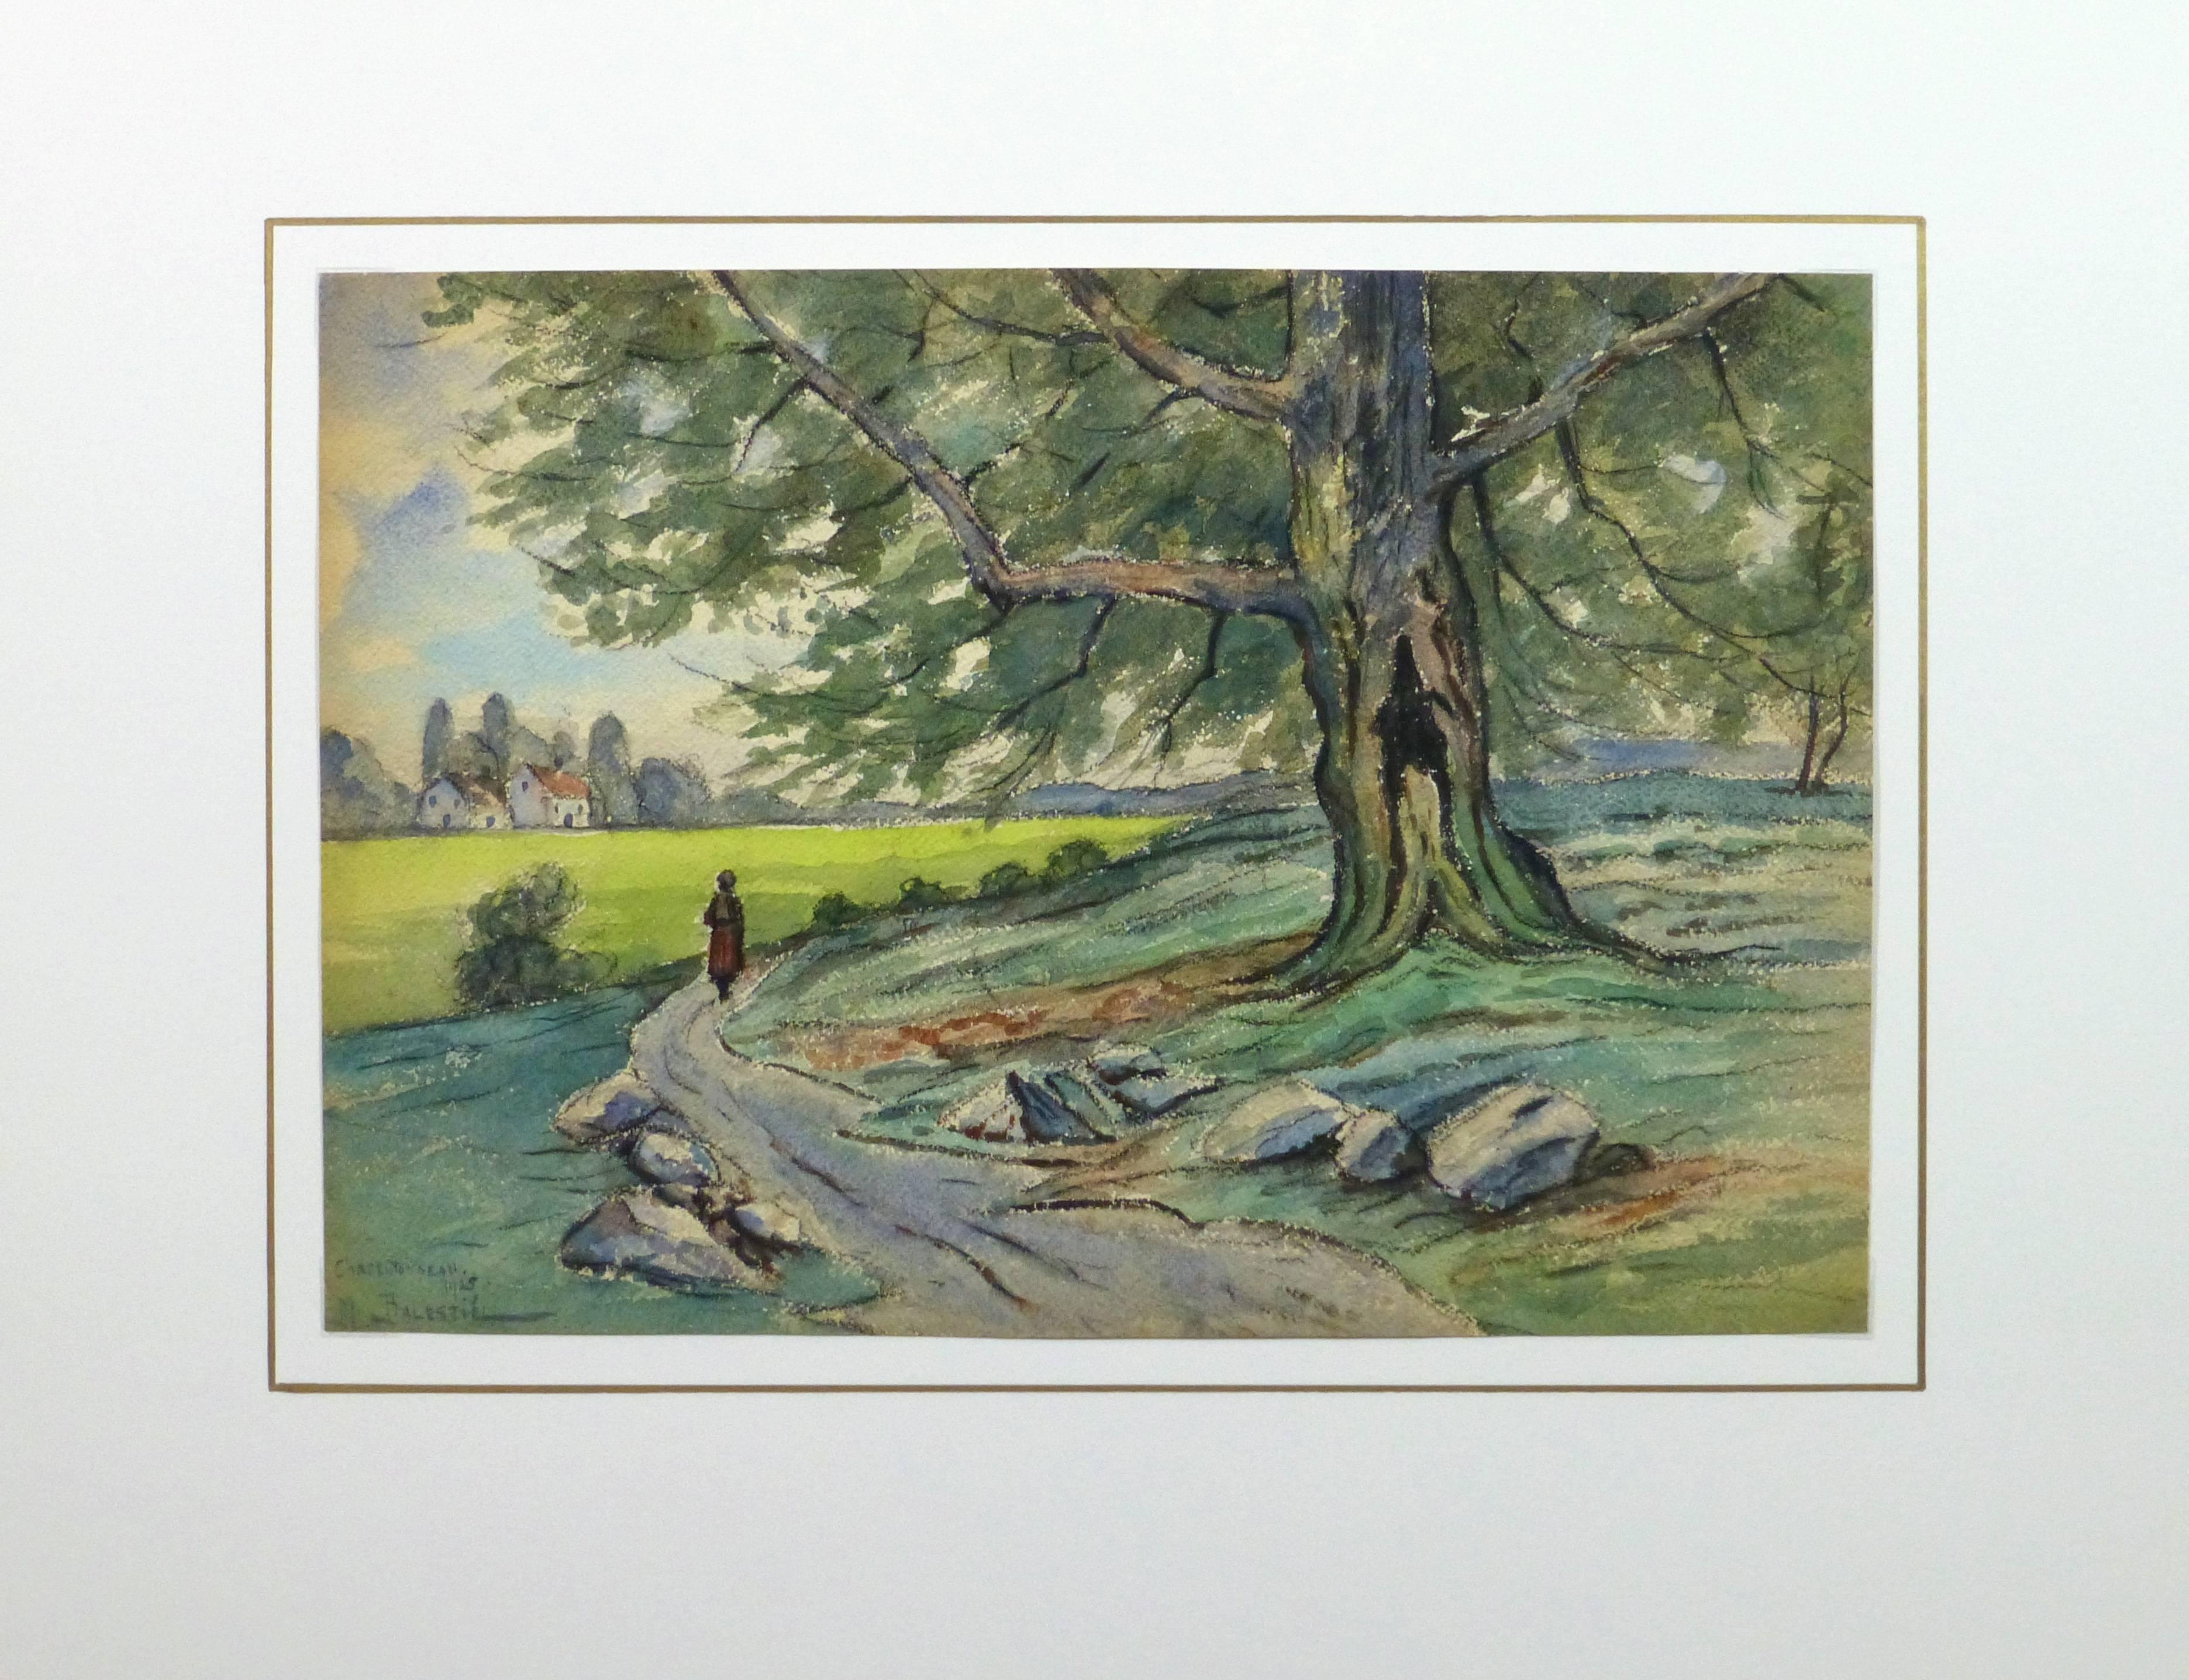 Serene watercolor of a figure headed down a winding path leading to a small farmstead in the distance by M. Balastié, 1925. Titled, "Charentonneau", dated and signed lower left. 

Original one-of-a-kind artwork on paper displayed on a